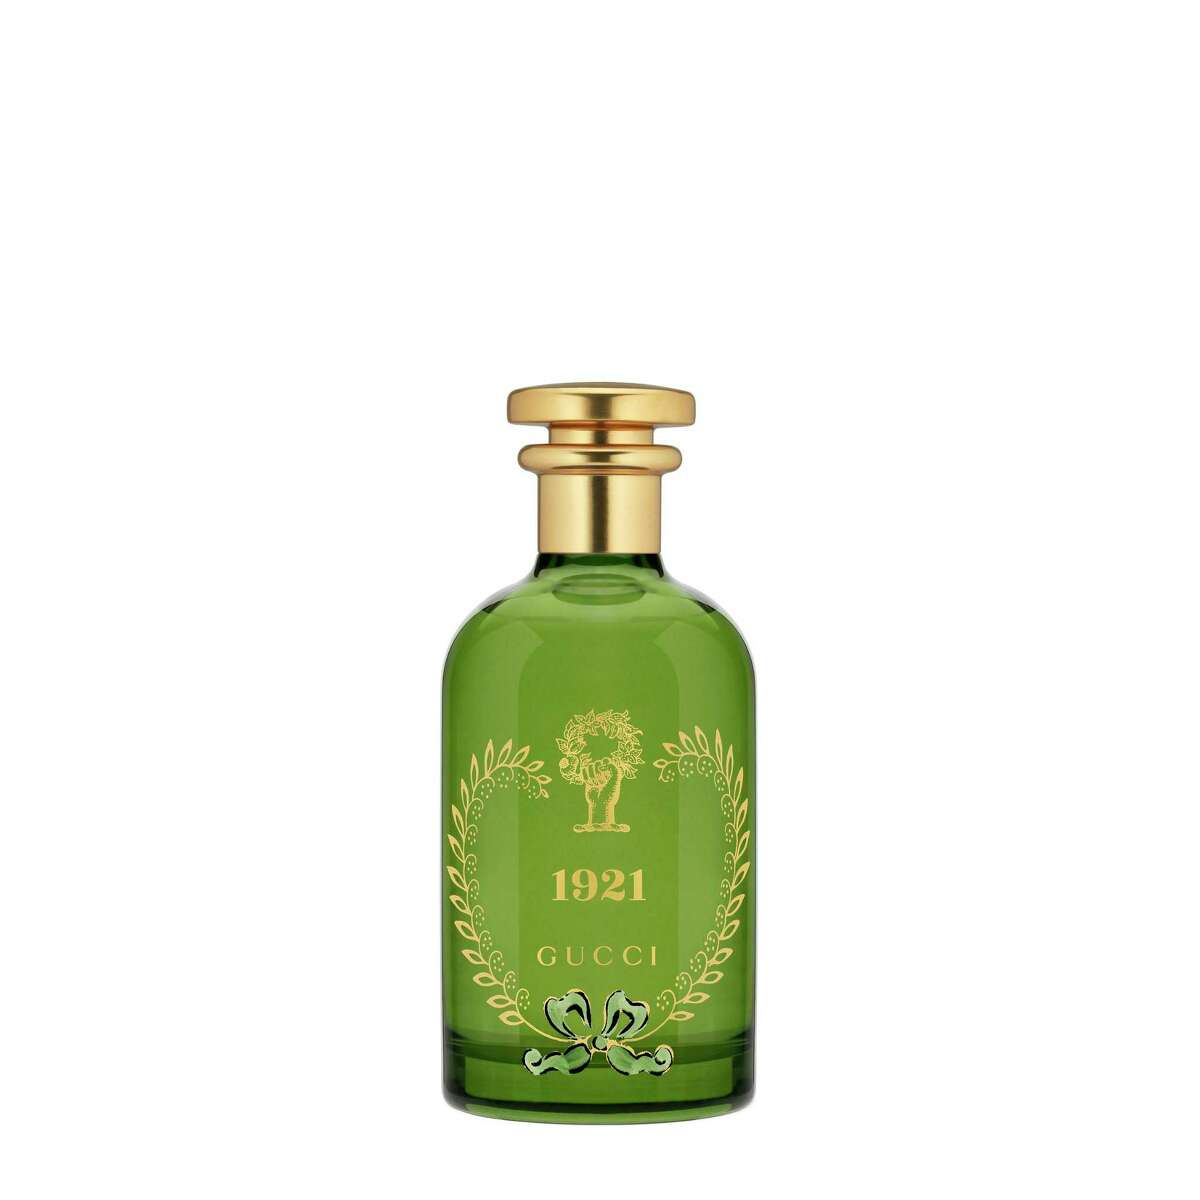 Gucci The Alchemist Garden Eau de Parfum 1921: The 11th fragrance from the Gucci collection offers a green garden abundance of neroli flower and Italian citrus with an earthy undertow of oak moss in this new, gender-free scent; $330 at Saks Fifth Avenue.